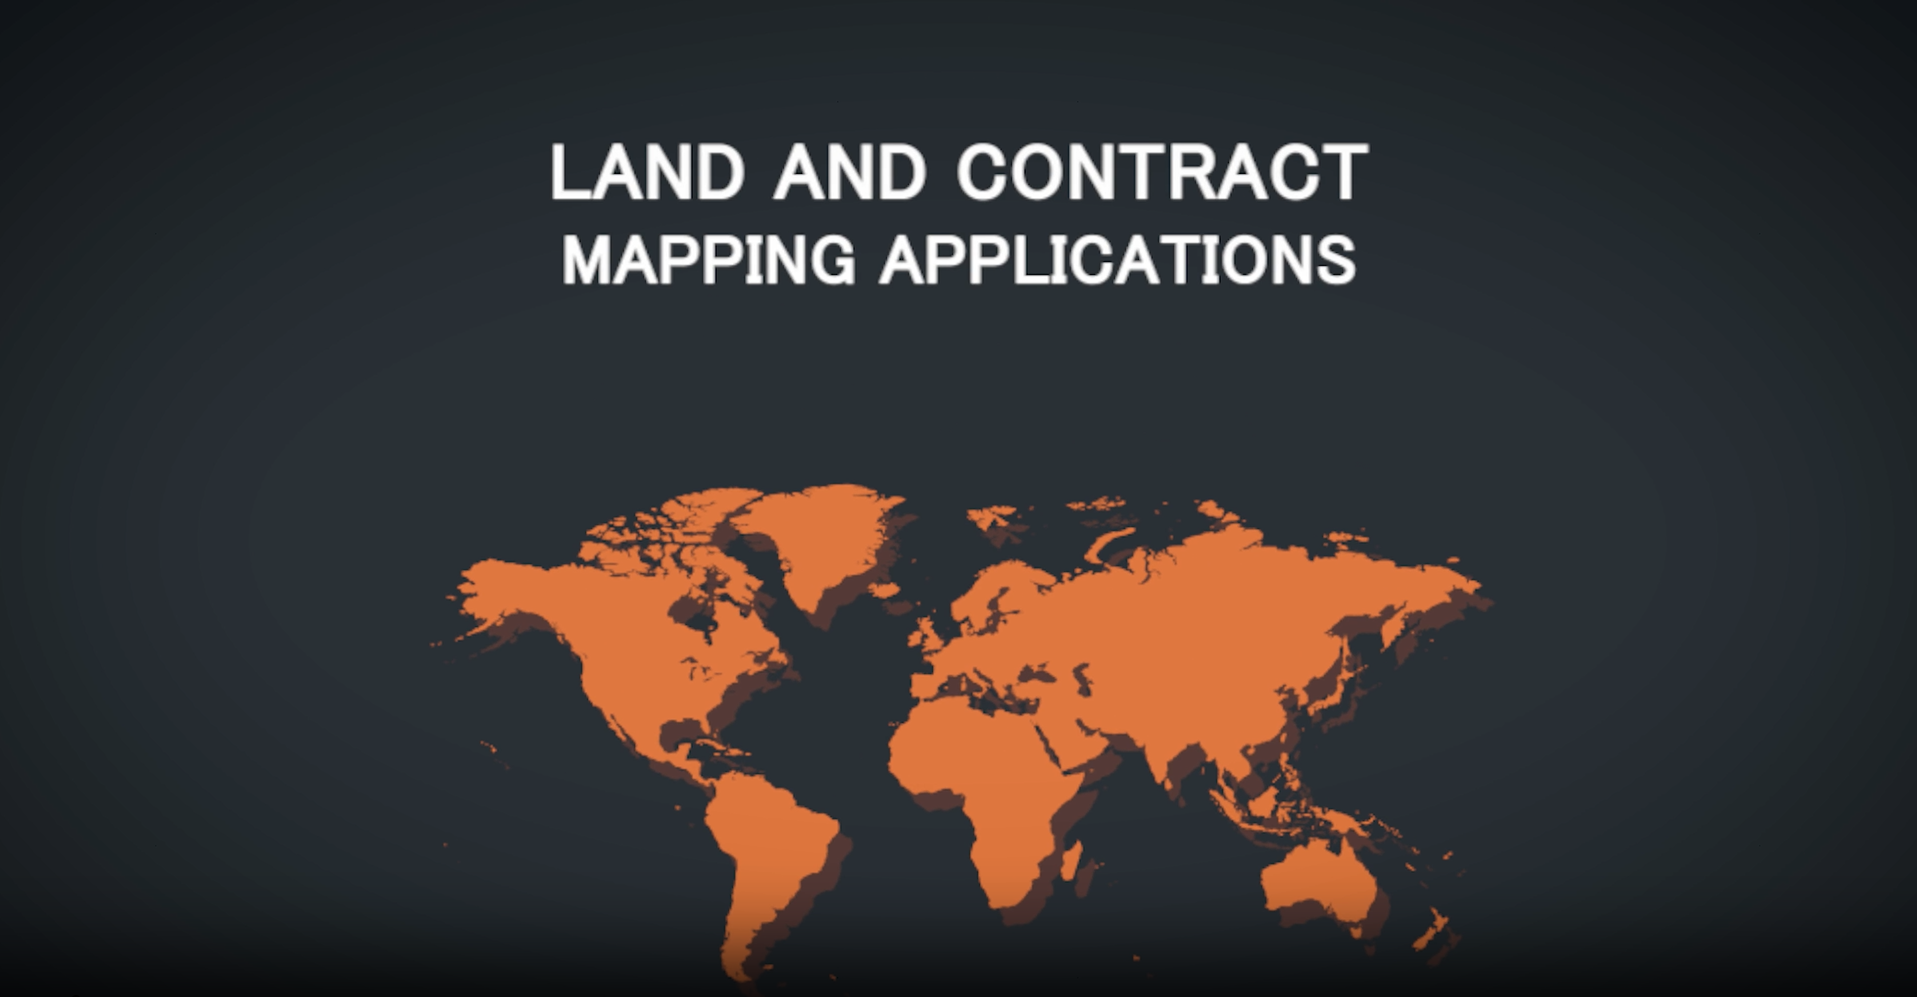 Enertia land and contract mapping video thumbnail